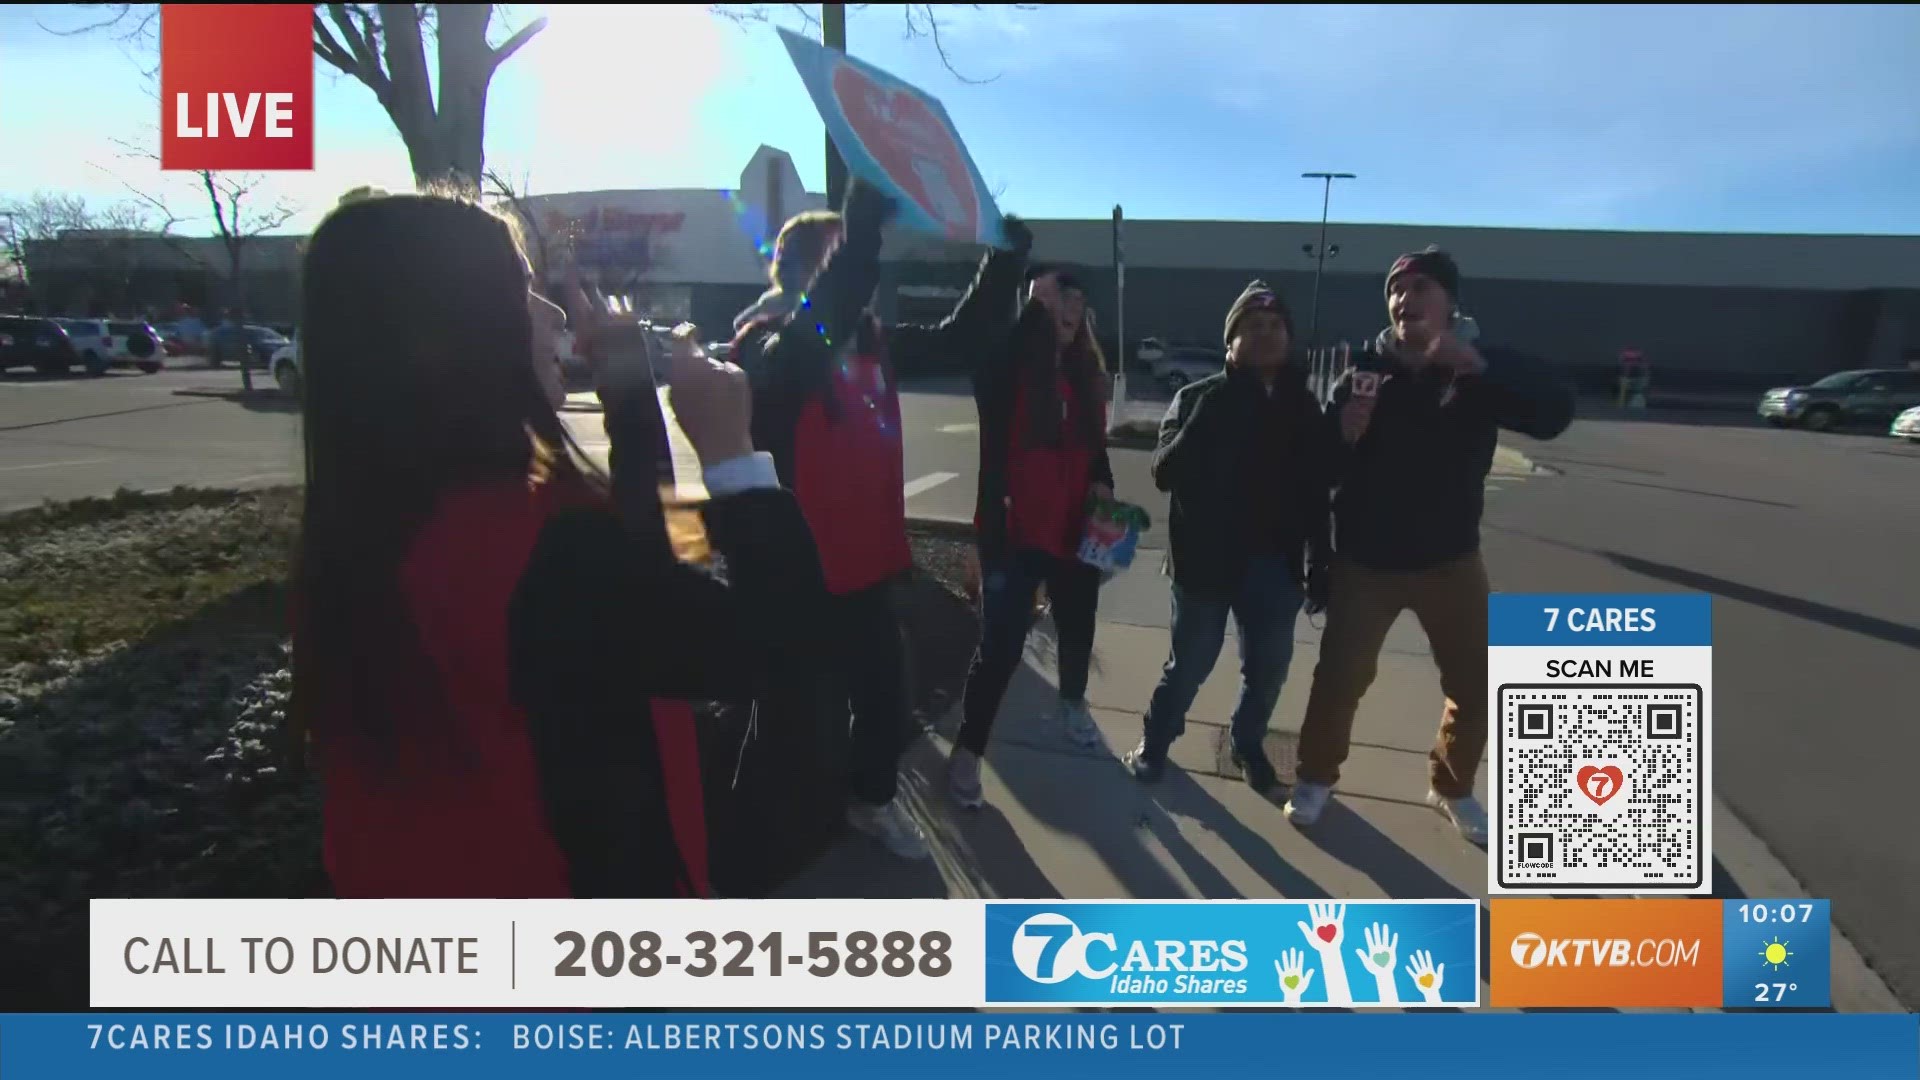 The cold was no match for the Capital Eagles, who spend Saturday morning supporting Idaho charities through KTVB's 16th annual 7Cares Idaho Shares giving campaign.